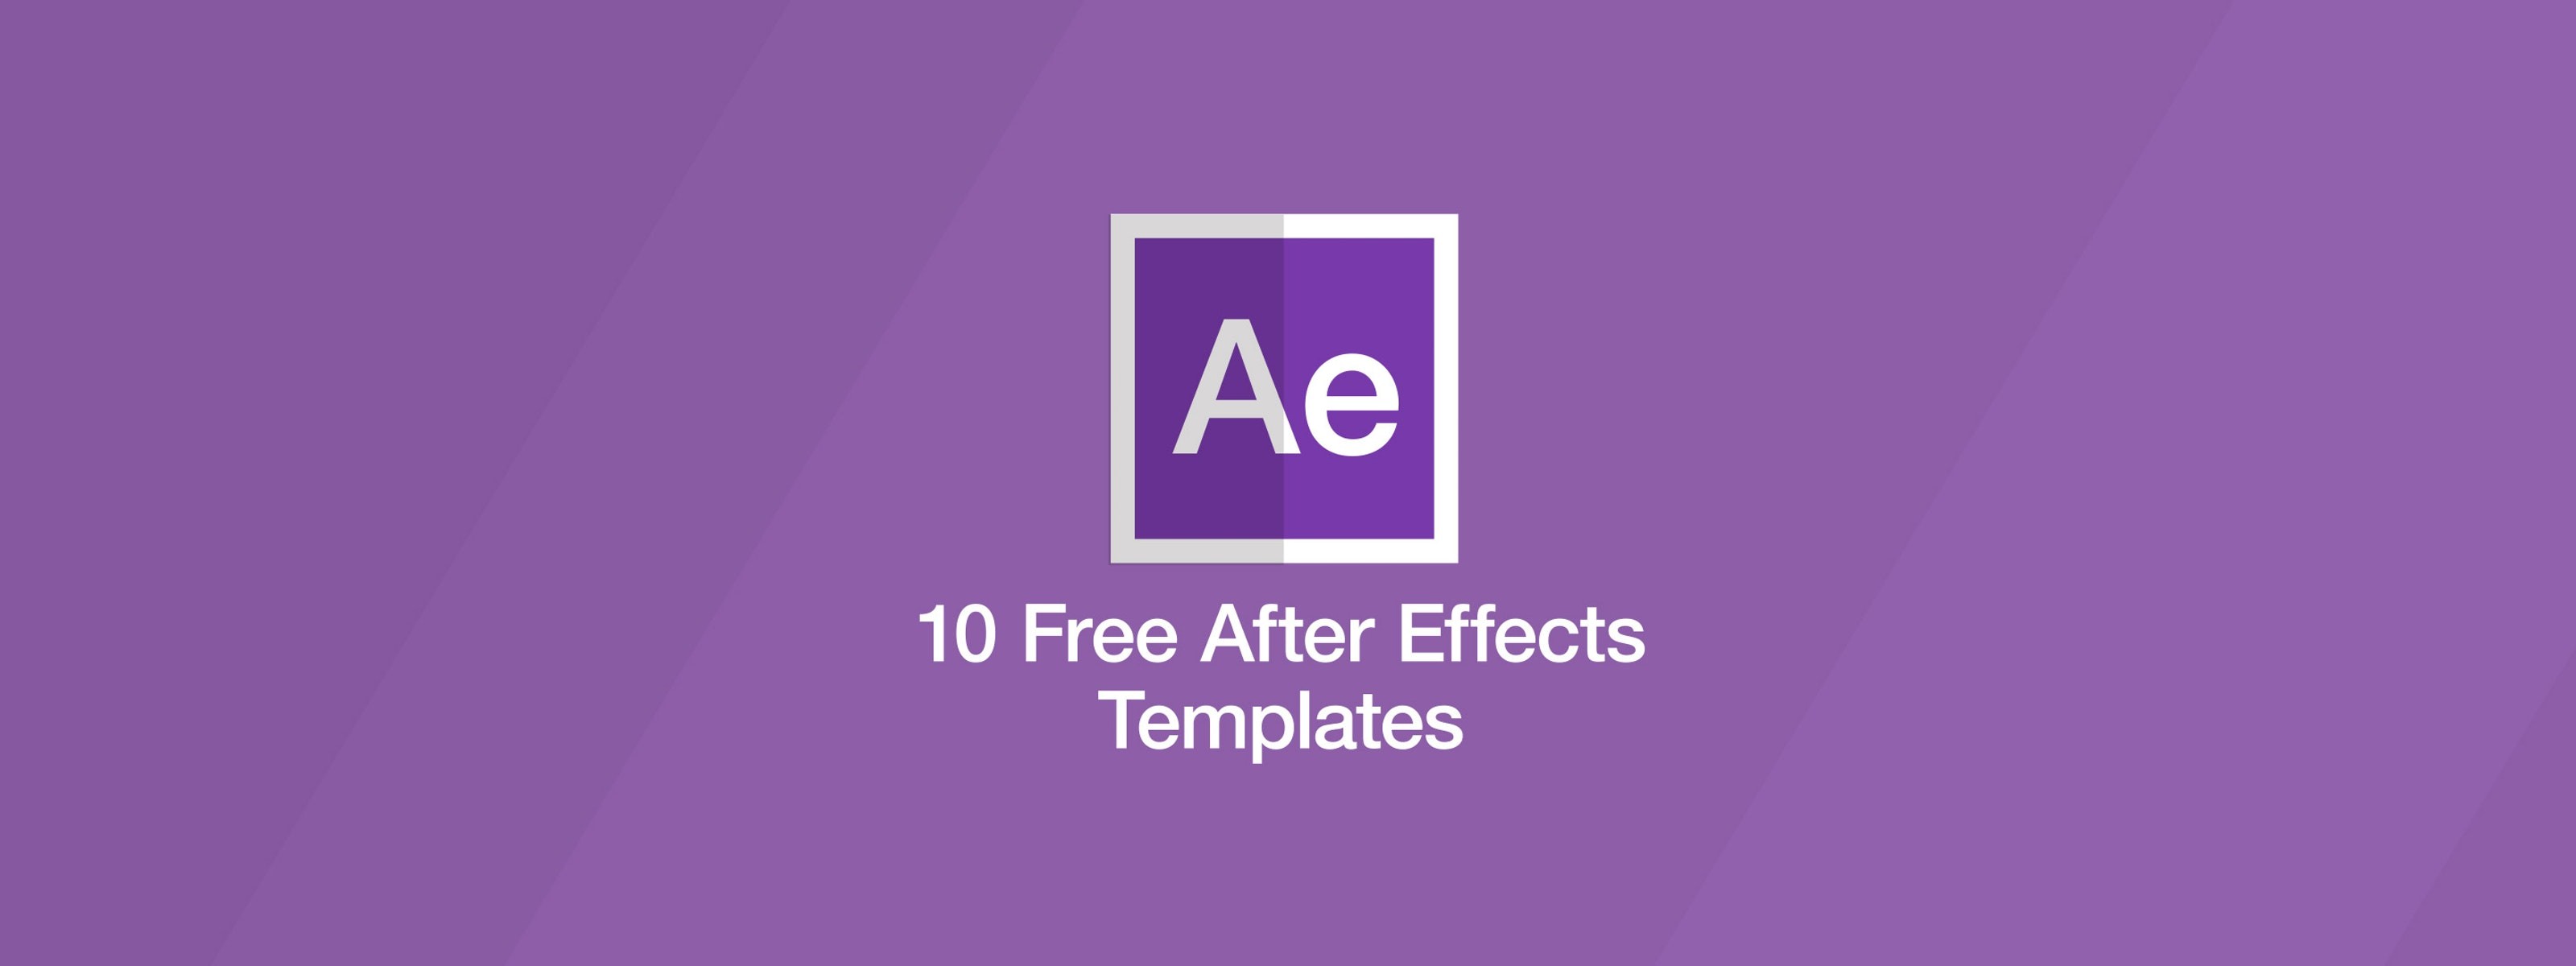 10 Free After Effects Templates Motion Array Ae Text